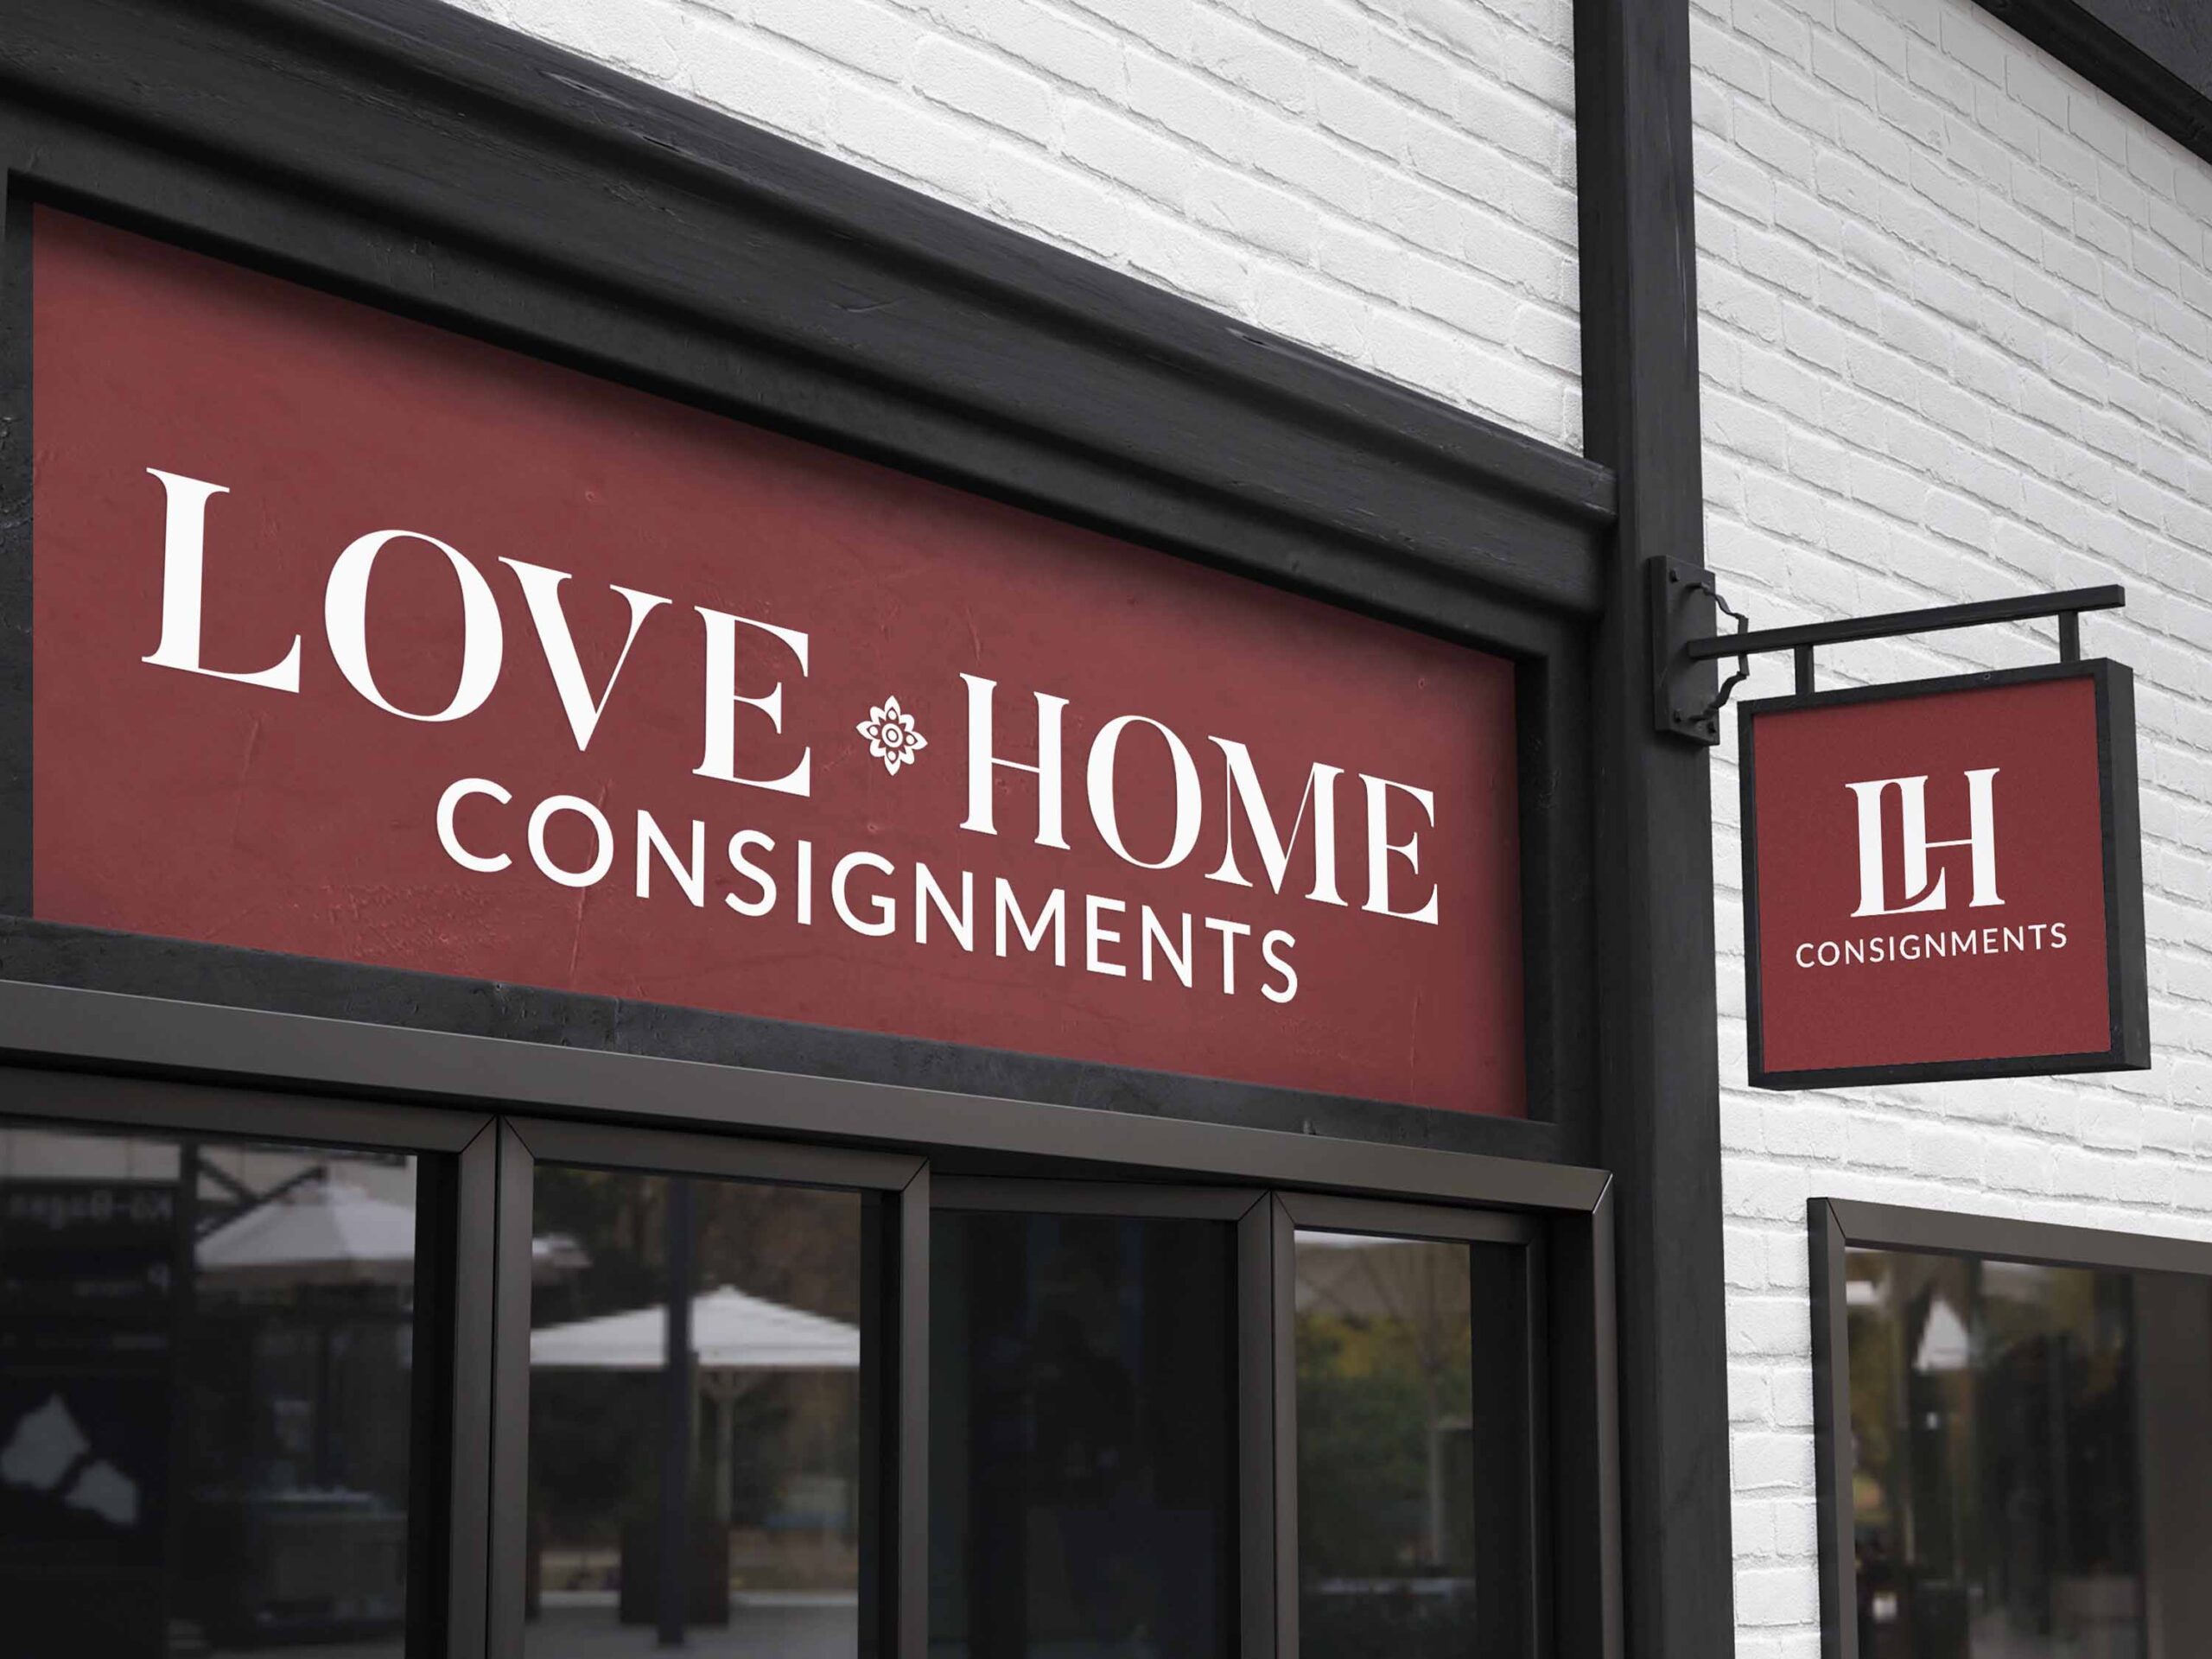 Love Home Signage